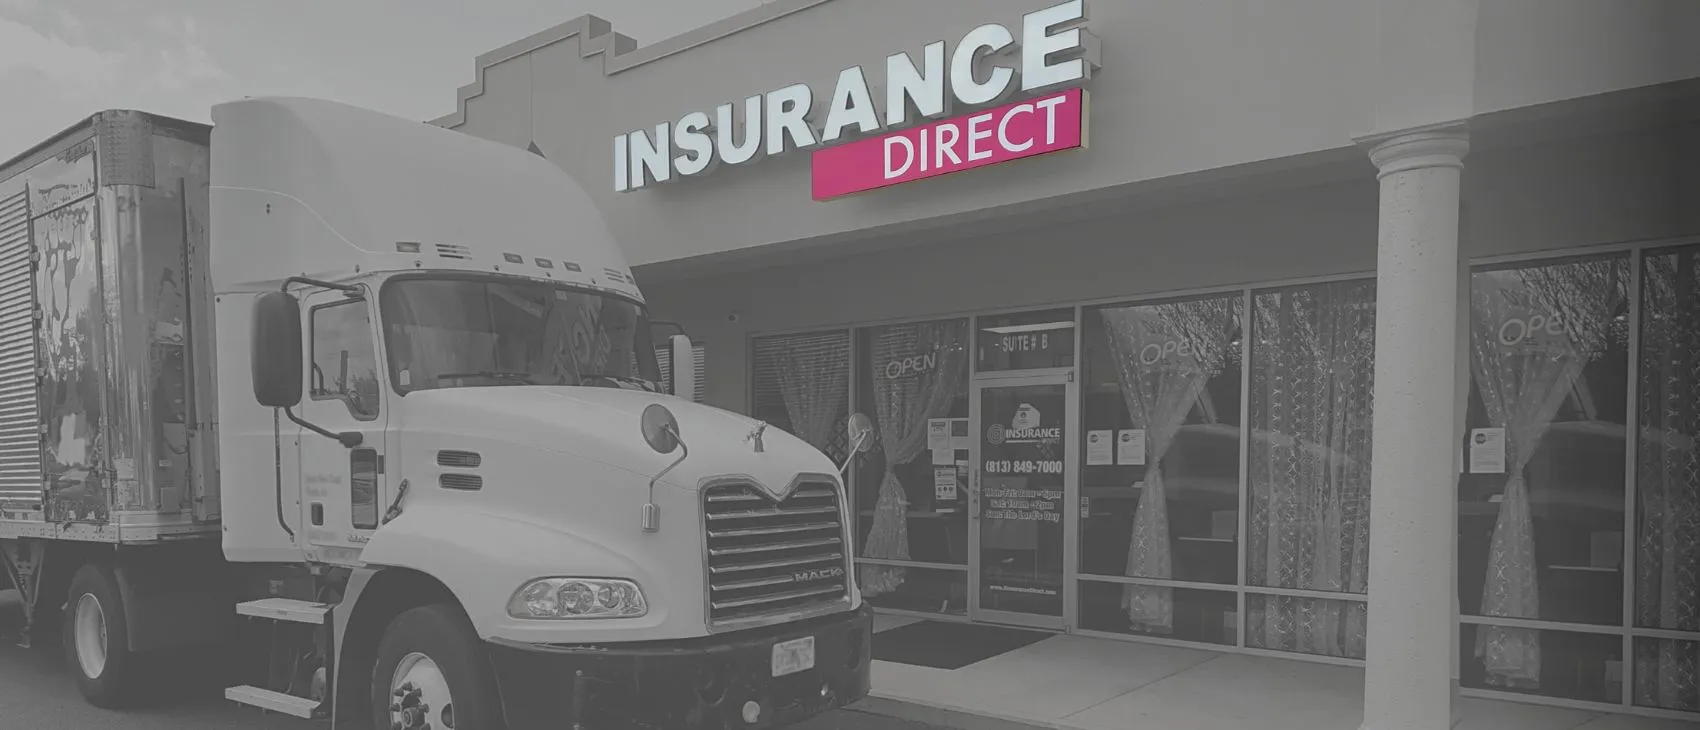 City of Ybor City Car Insurance Cheap Rates. Start your Auto Insurance Quote Now and Save!